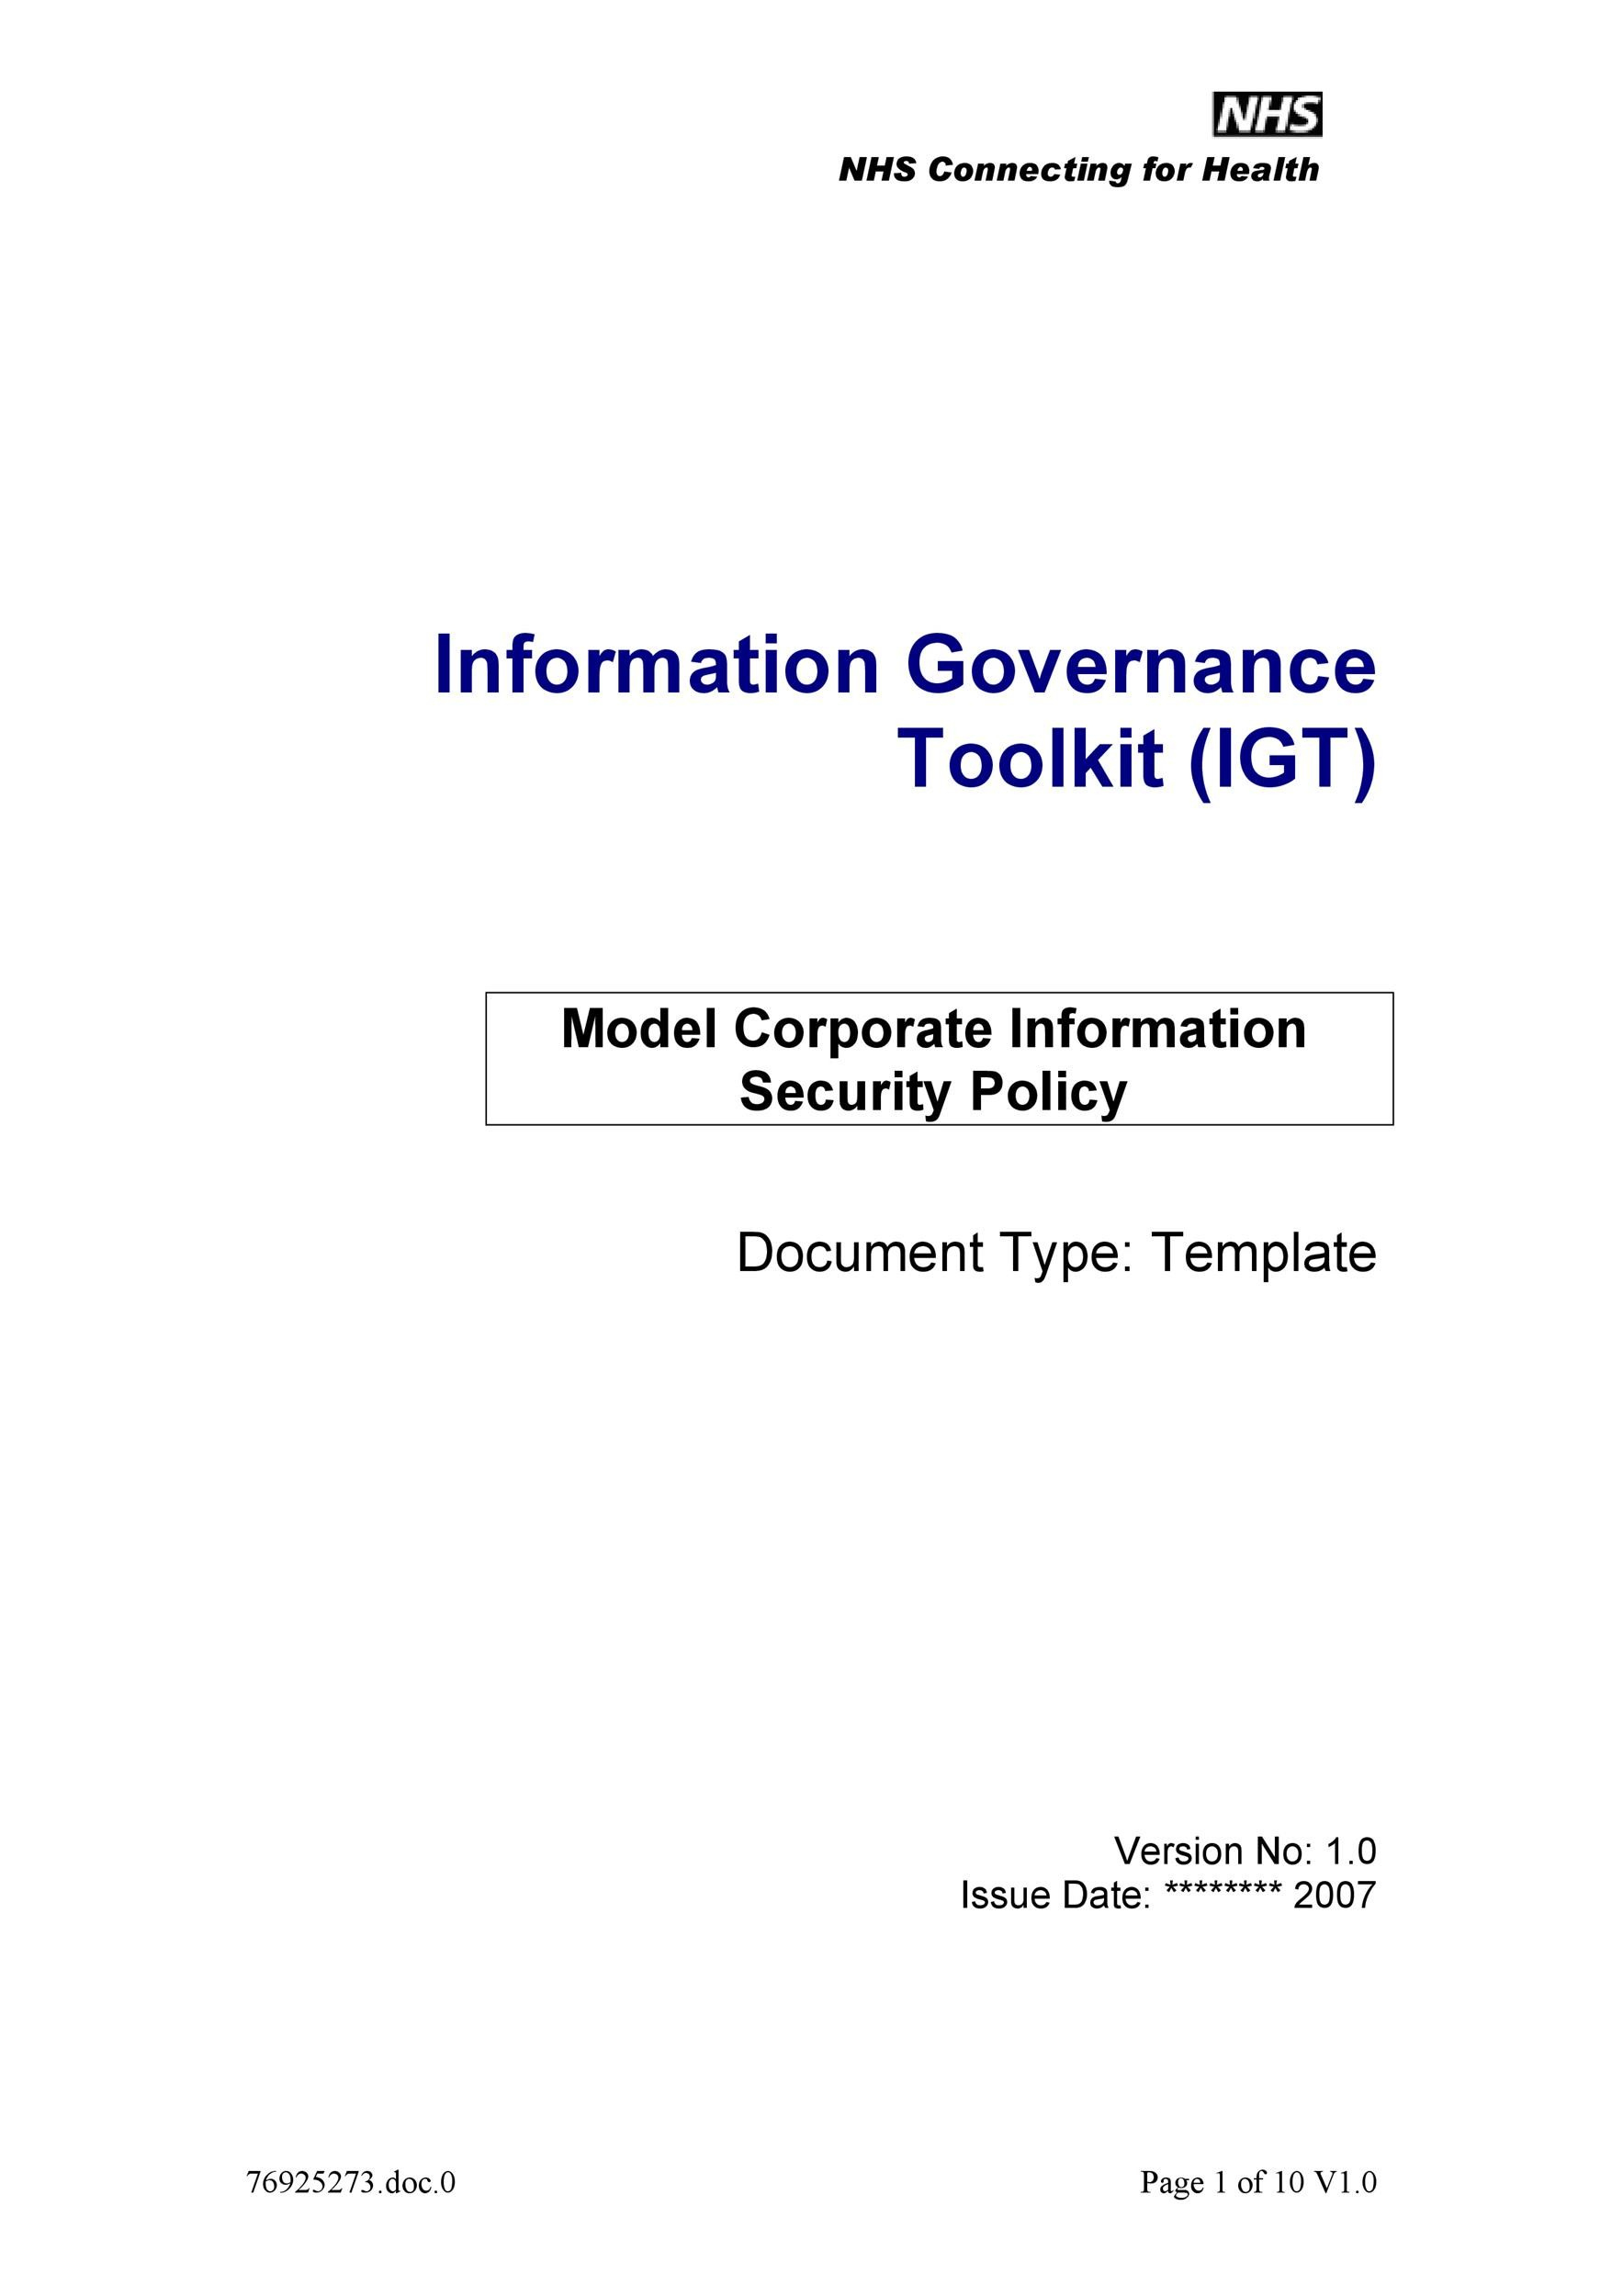 42 Information Security Policy Templates [Cyber Security] ᐅ Templatelab with Cyber Security Policy Template